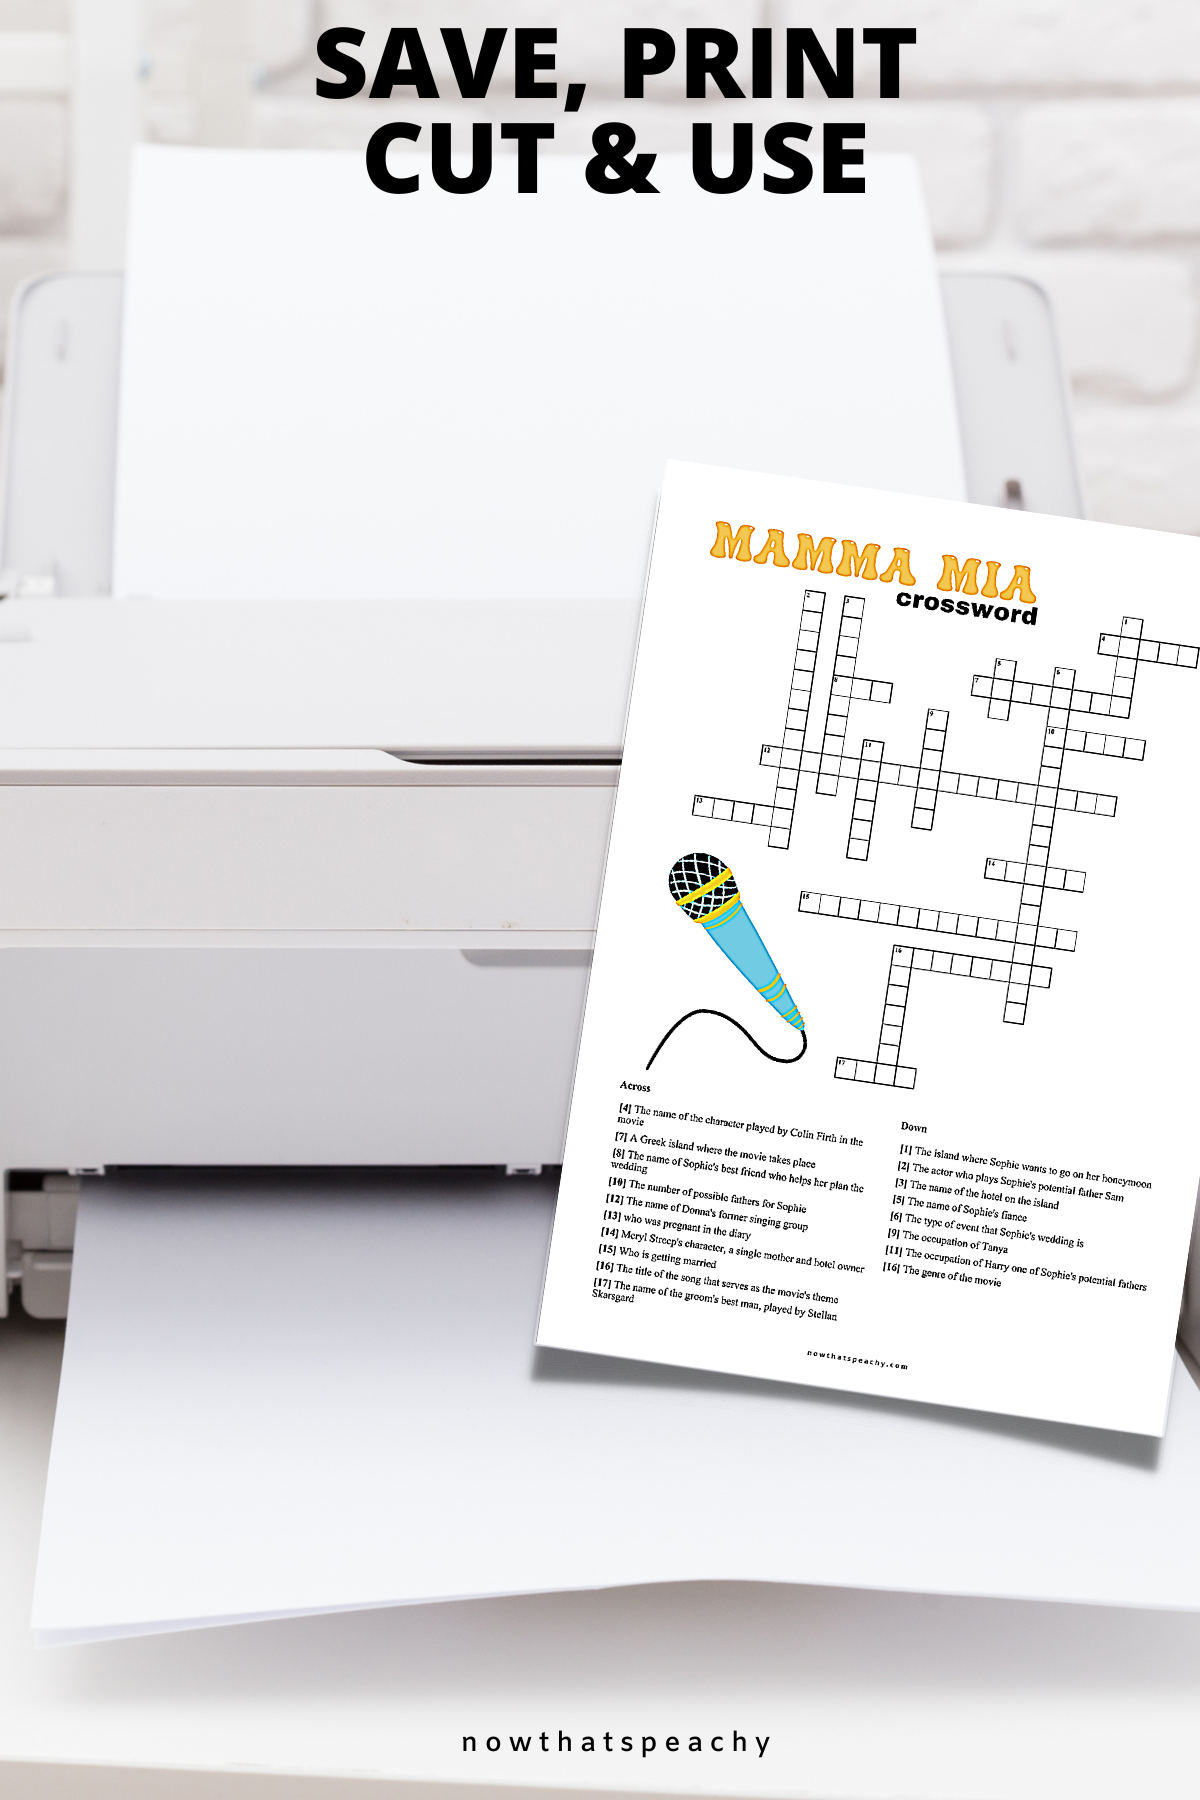 Mamma Mia crossword quiz question game 1970s flared denim pants seventies 70's disco ball karaoke  printable template digital instant download edit Donna and the dynamos invite edit custom musical movie design black white modern color fun themed bachelorette birthday charity fundraiser event activity